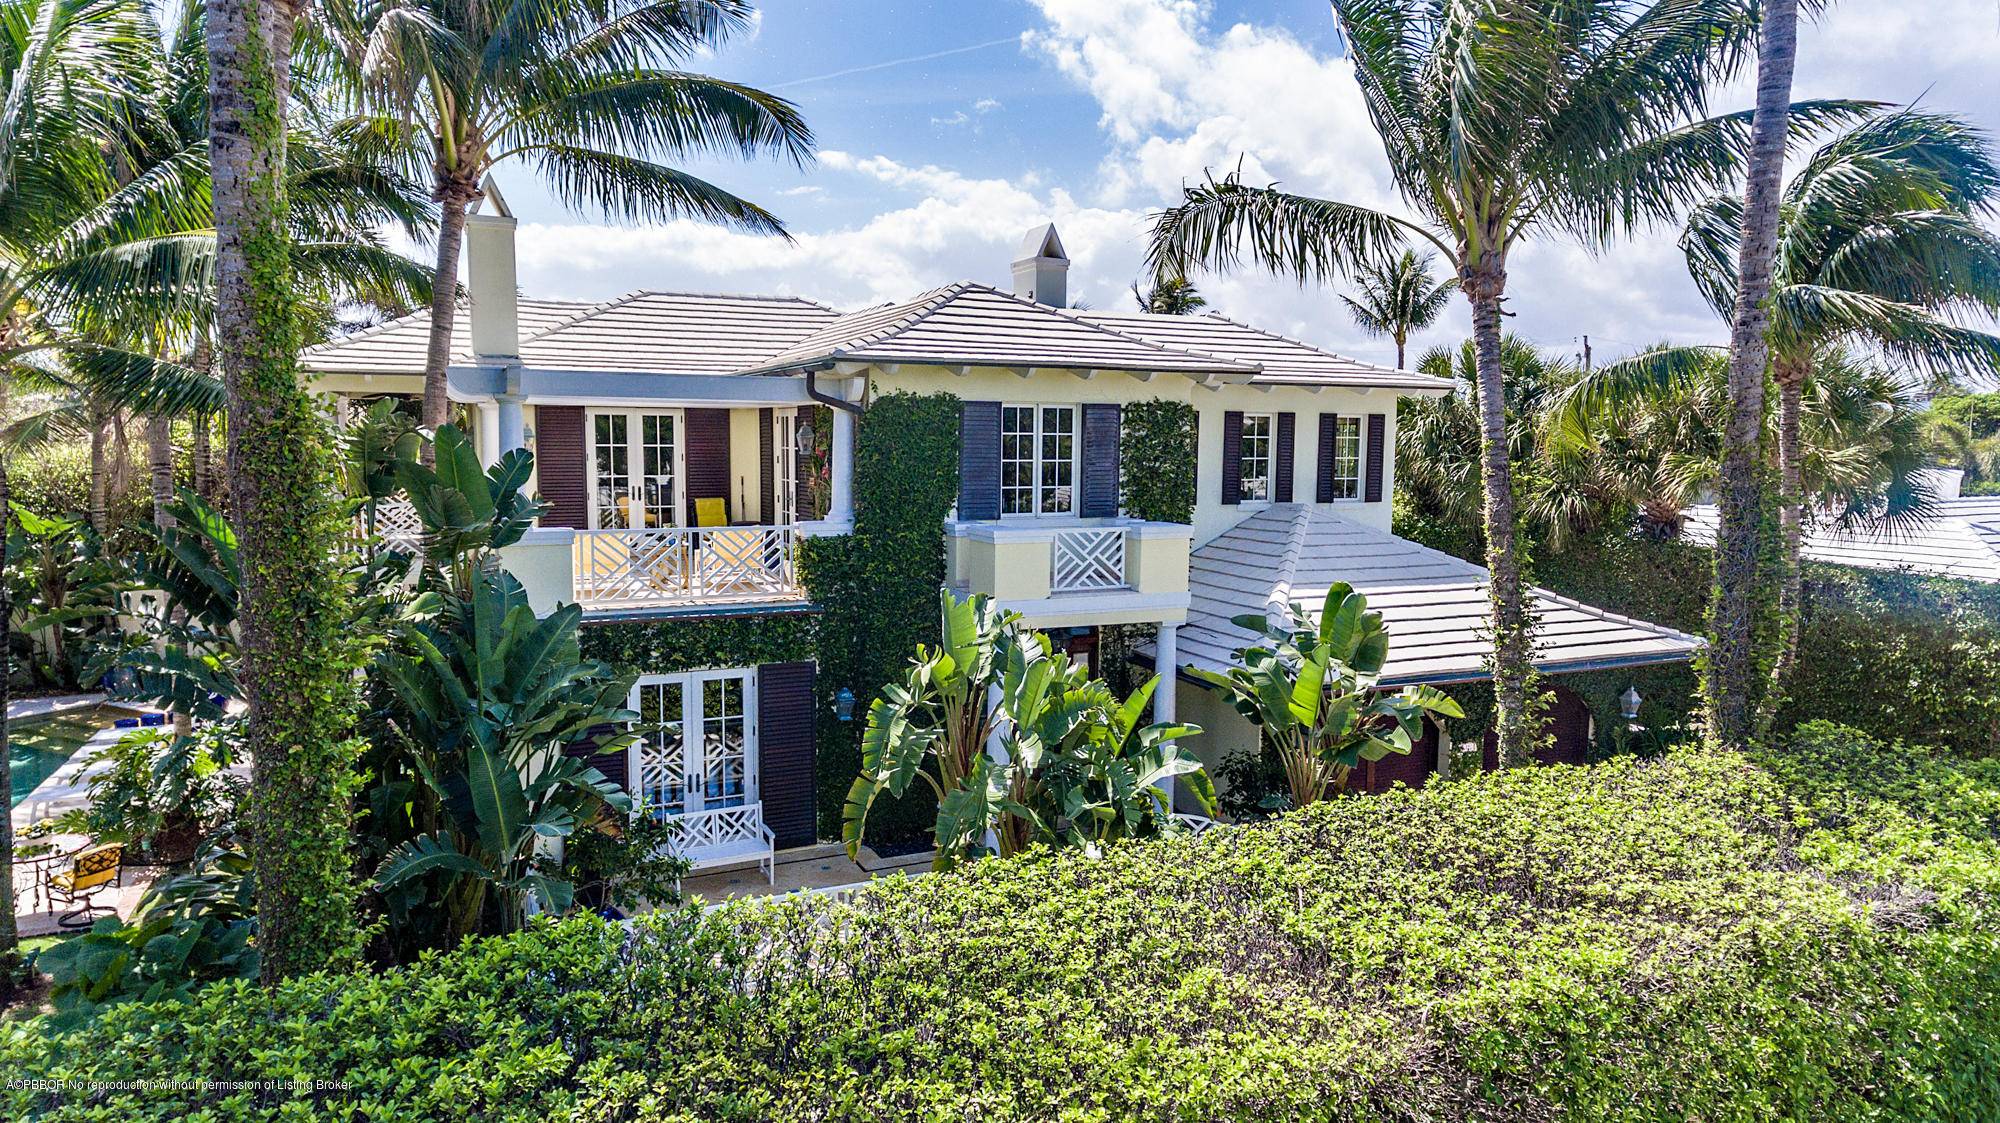 Beautiful British West Indies style island home located three houses off the beach offers exceptional finishes and casual elegance.